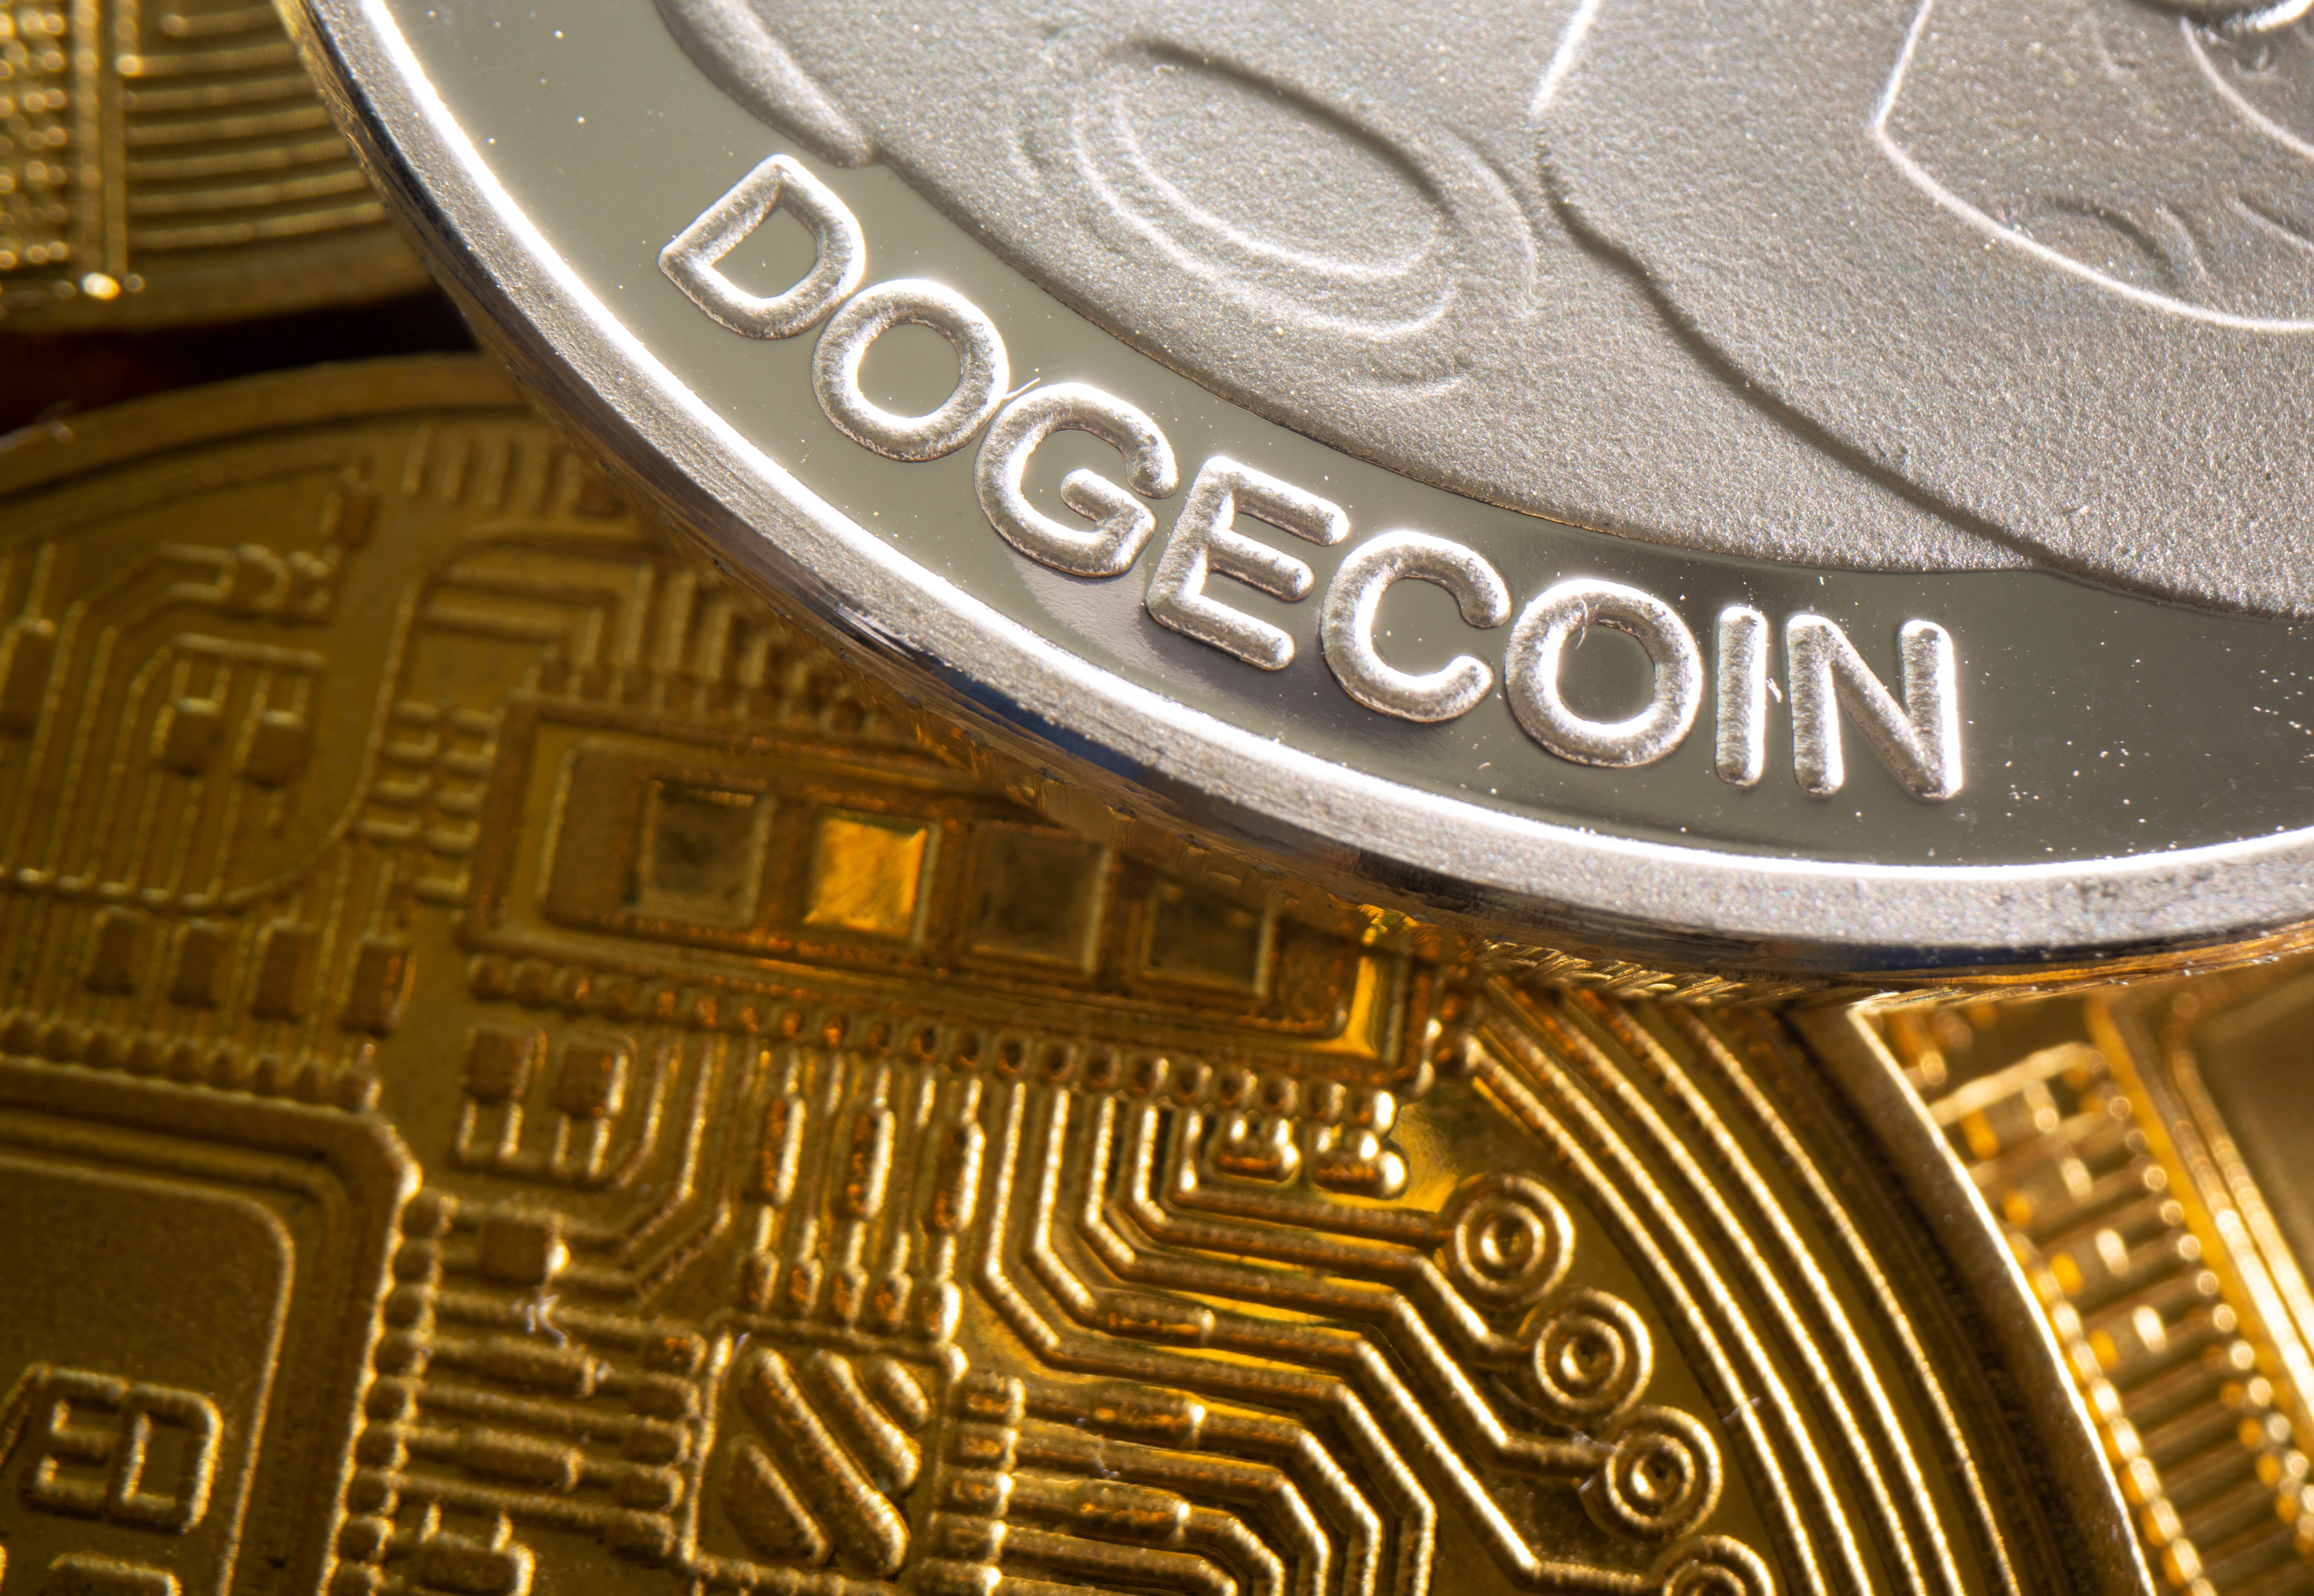 A representation of cryptocurrency Dogecoin is seen in this illustration taken August 6, 2021. REUTERS/Dado Ruvic/Illustration